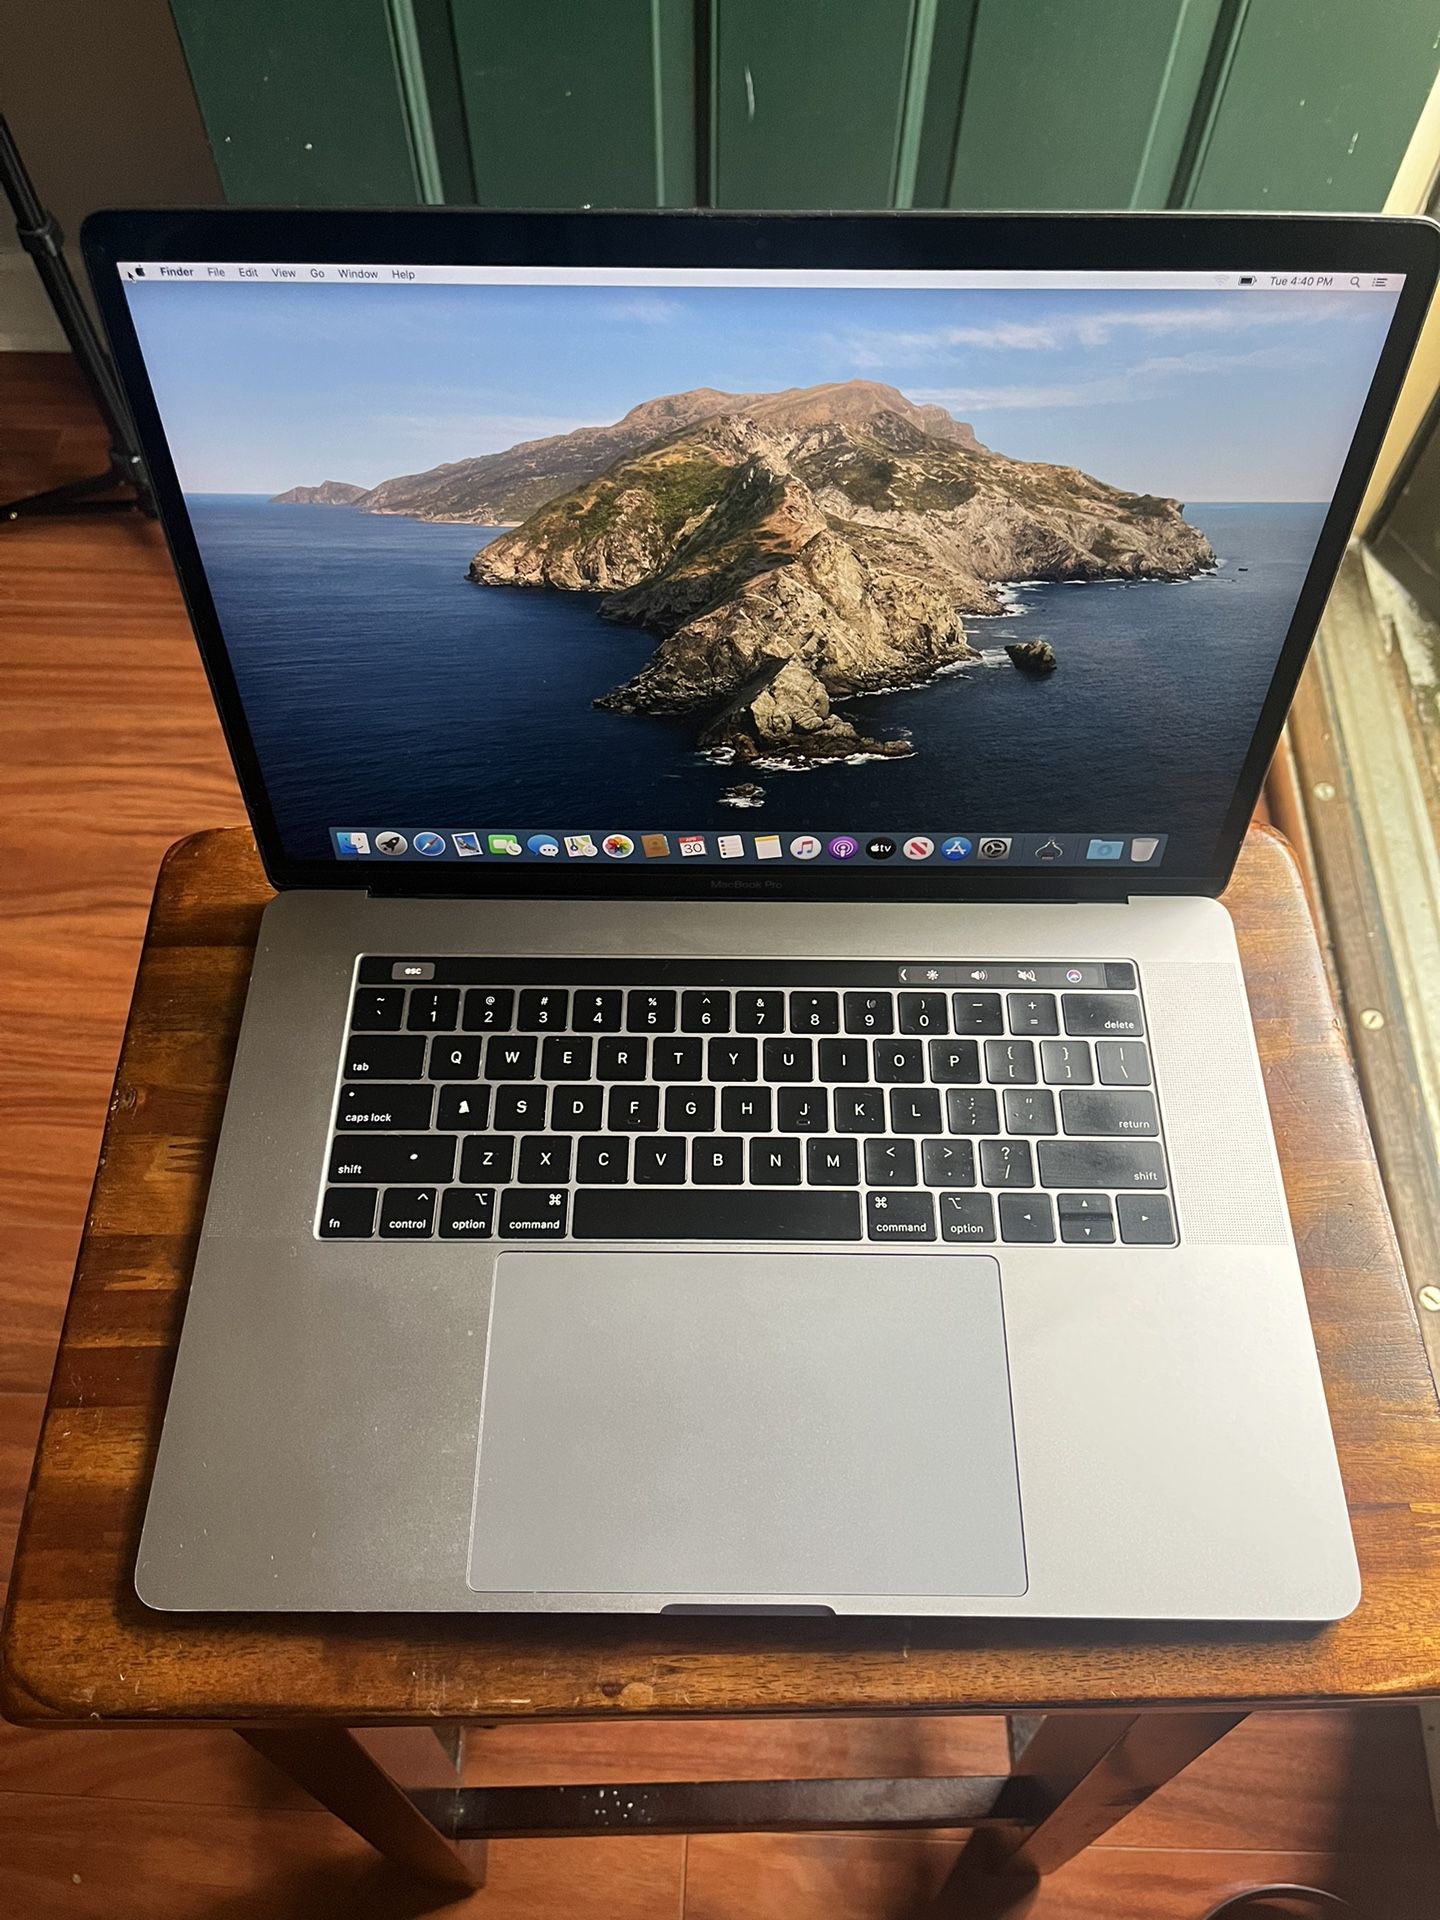 2019 Apple MacBook Pro 16GB Intel I9 8 Core 512GB With Only 300 Count On Battery, Excellent Shape, Comes With Charger